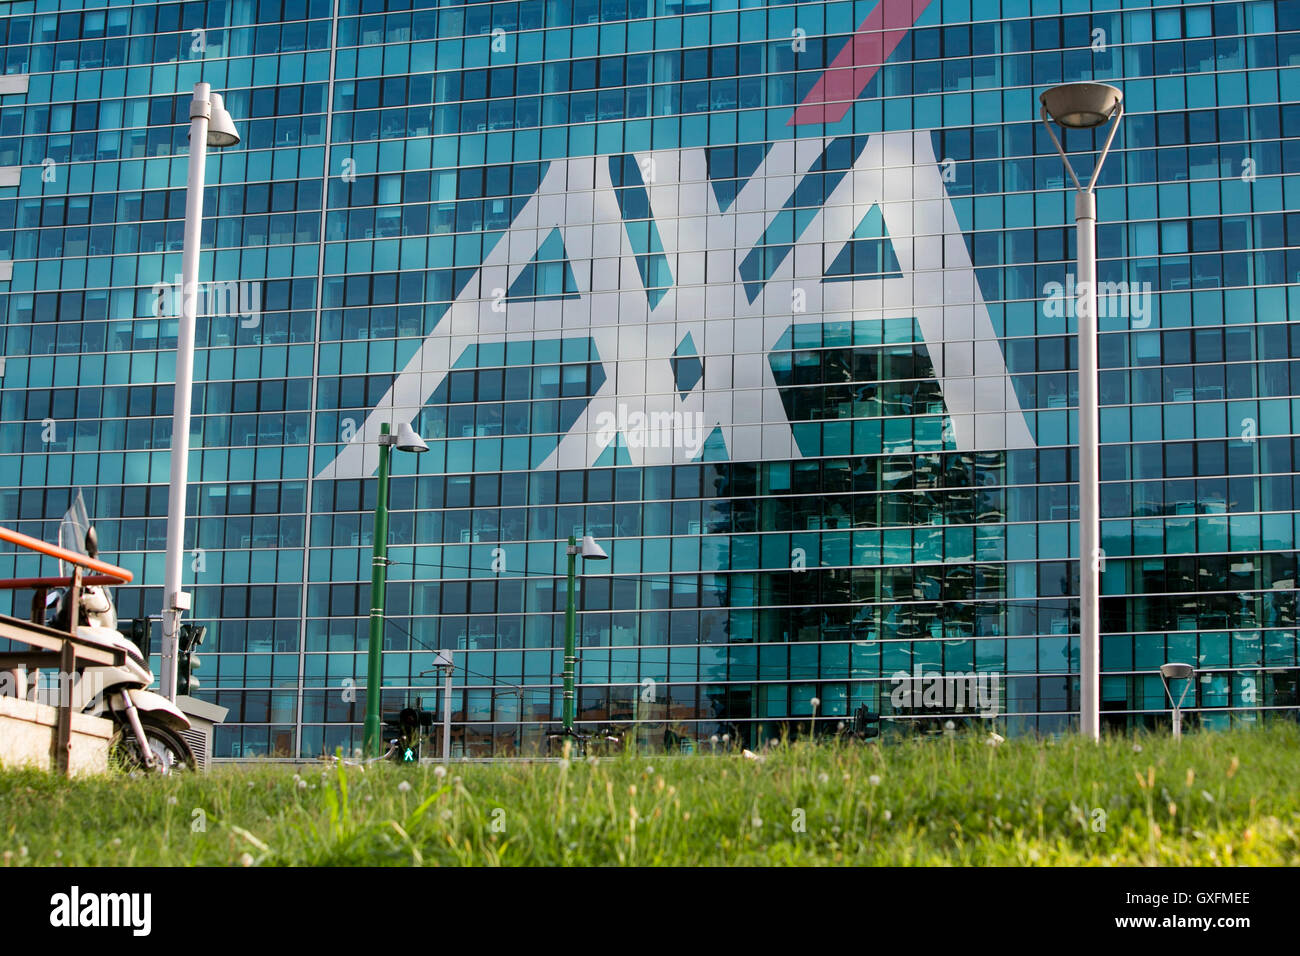 A logo sign outside of a facility occupied by AXA in Milan, Italy on September 3, 2016. Stock Photo